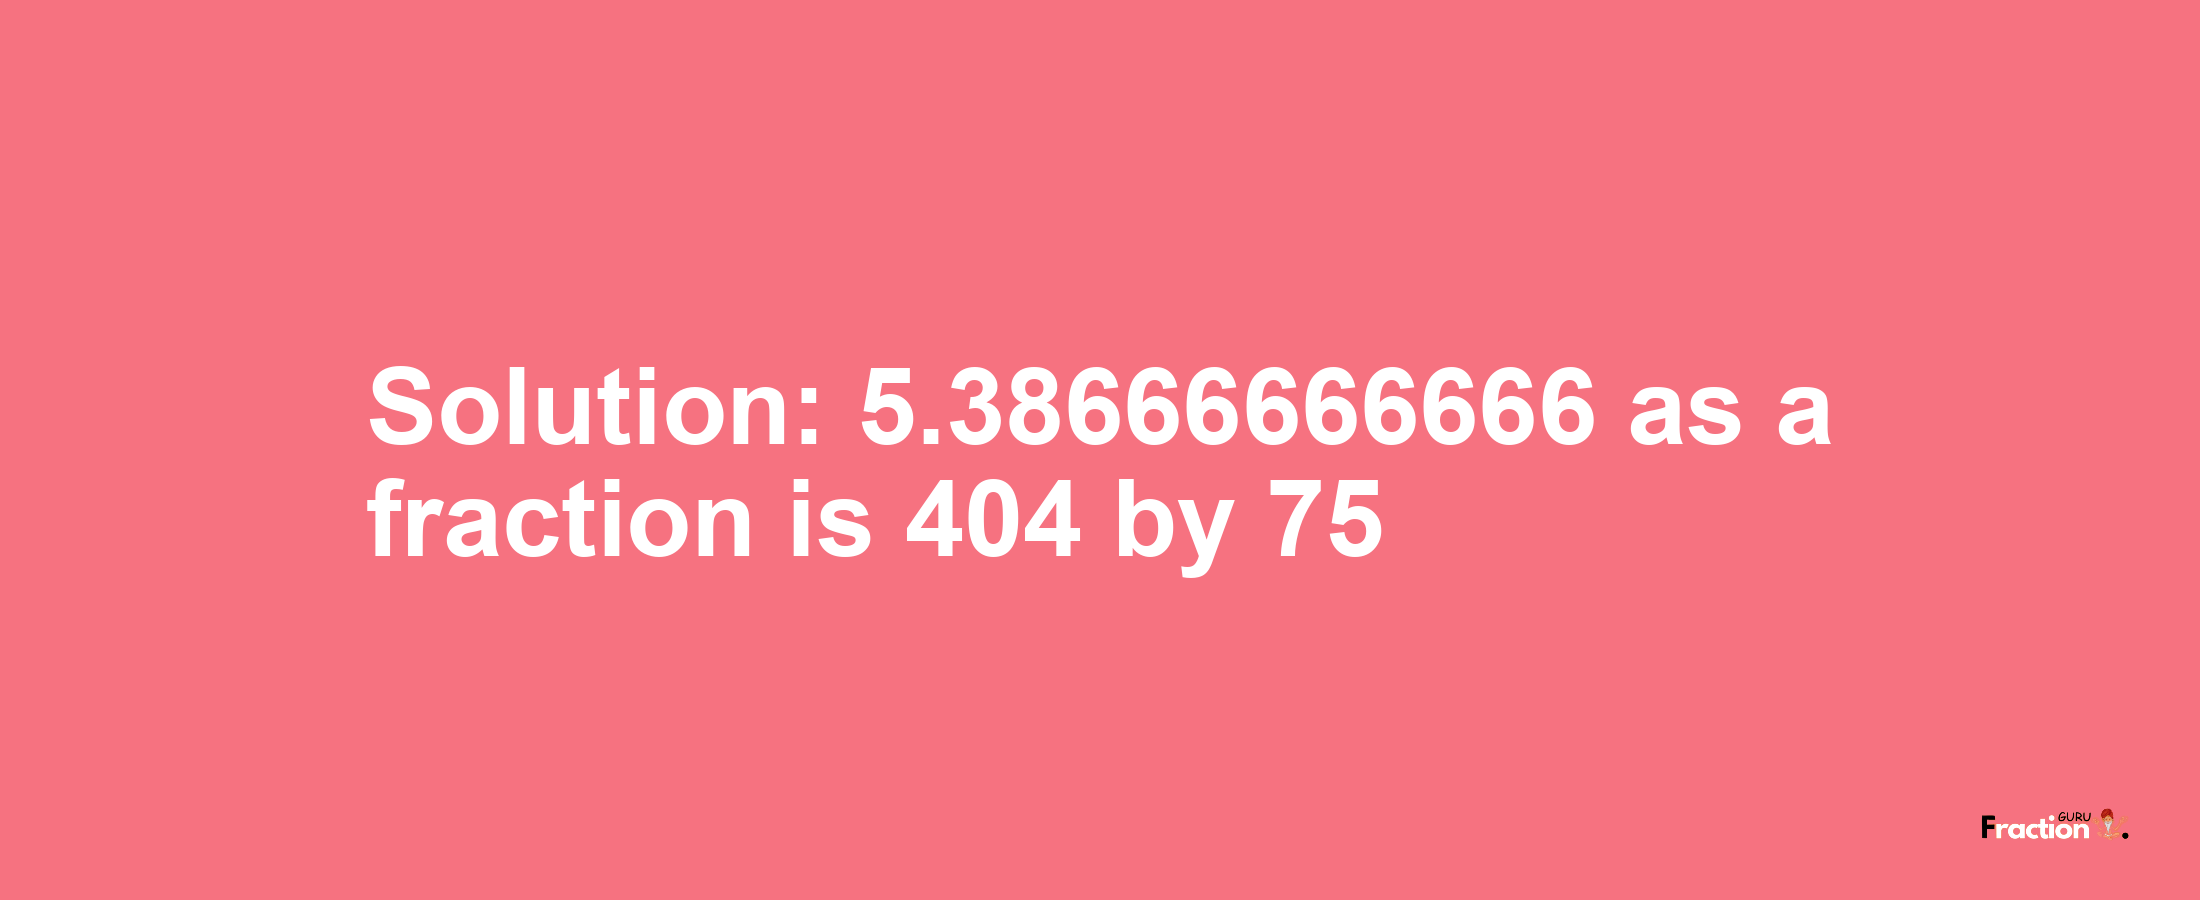 Solution:5.38666666666 as a fraction is 404/75